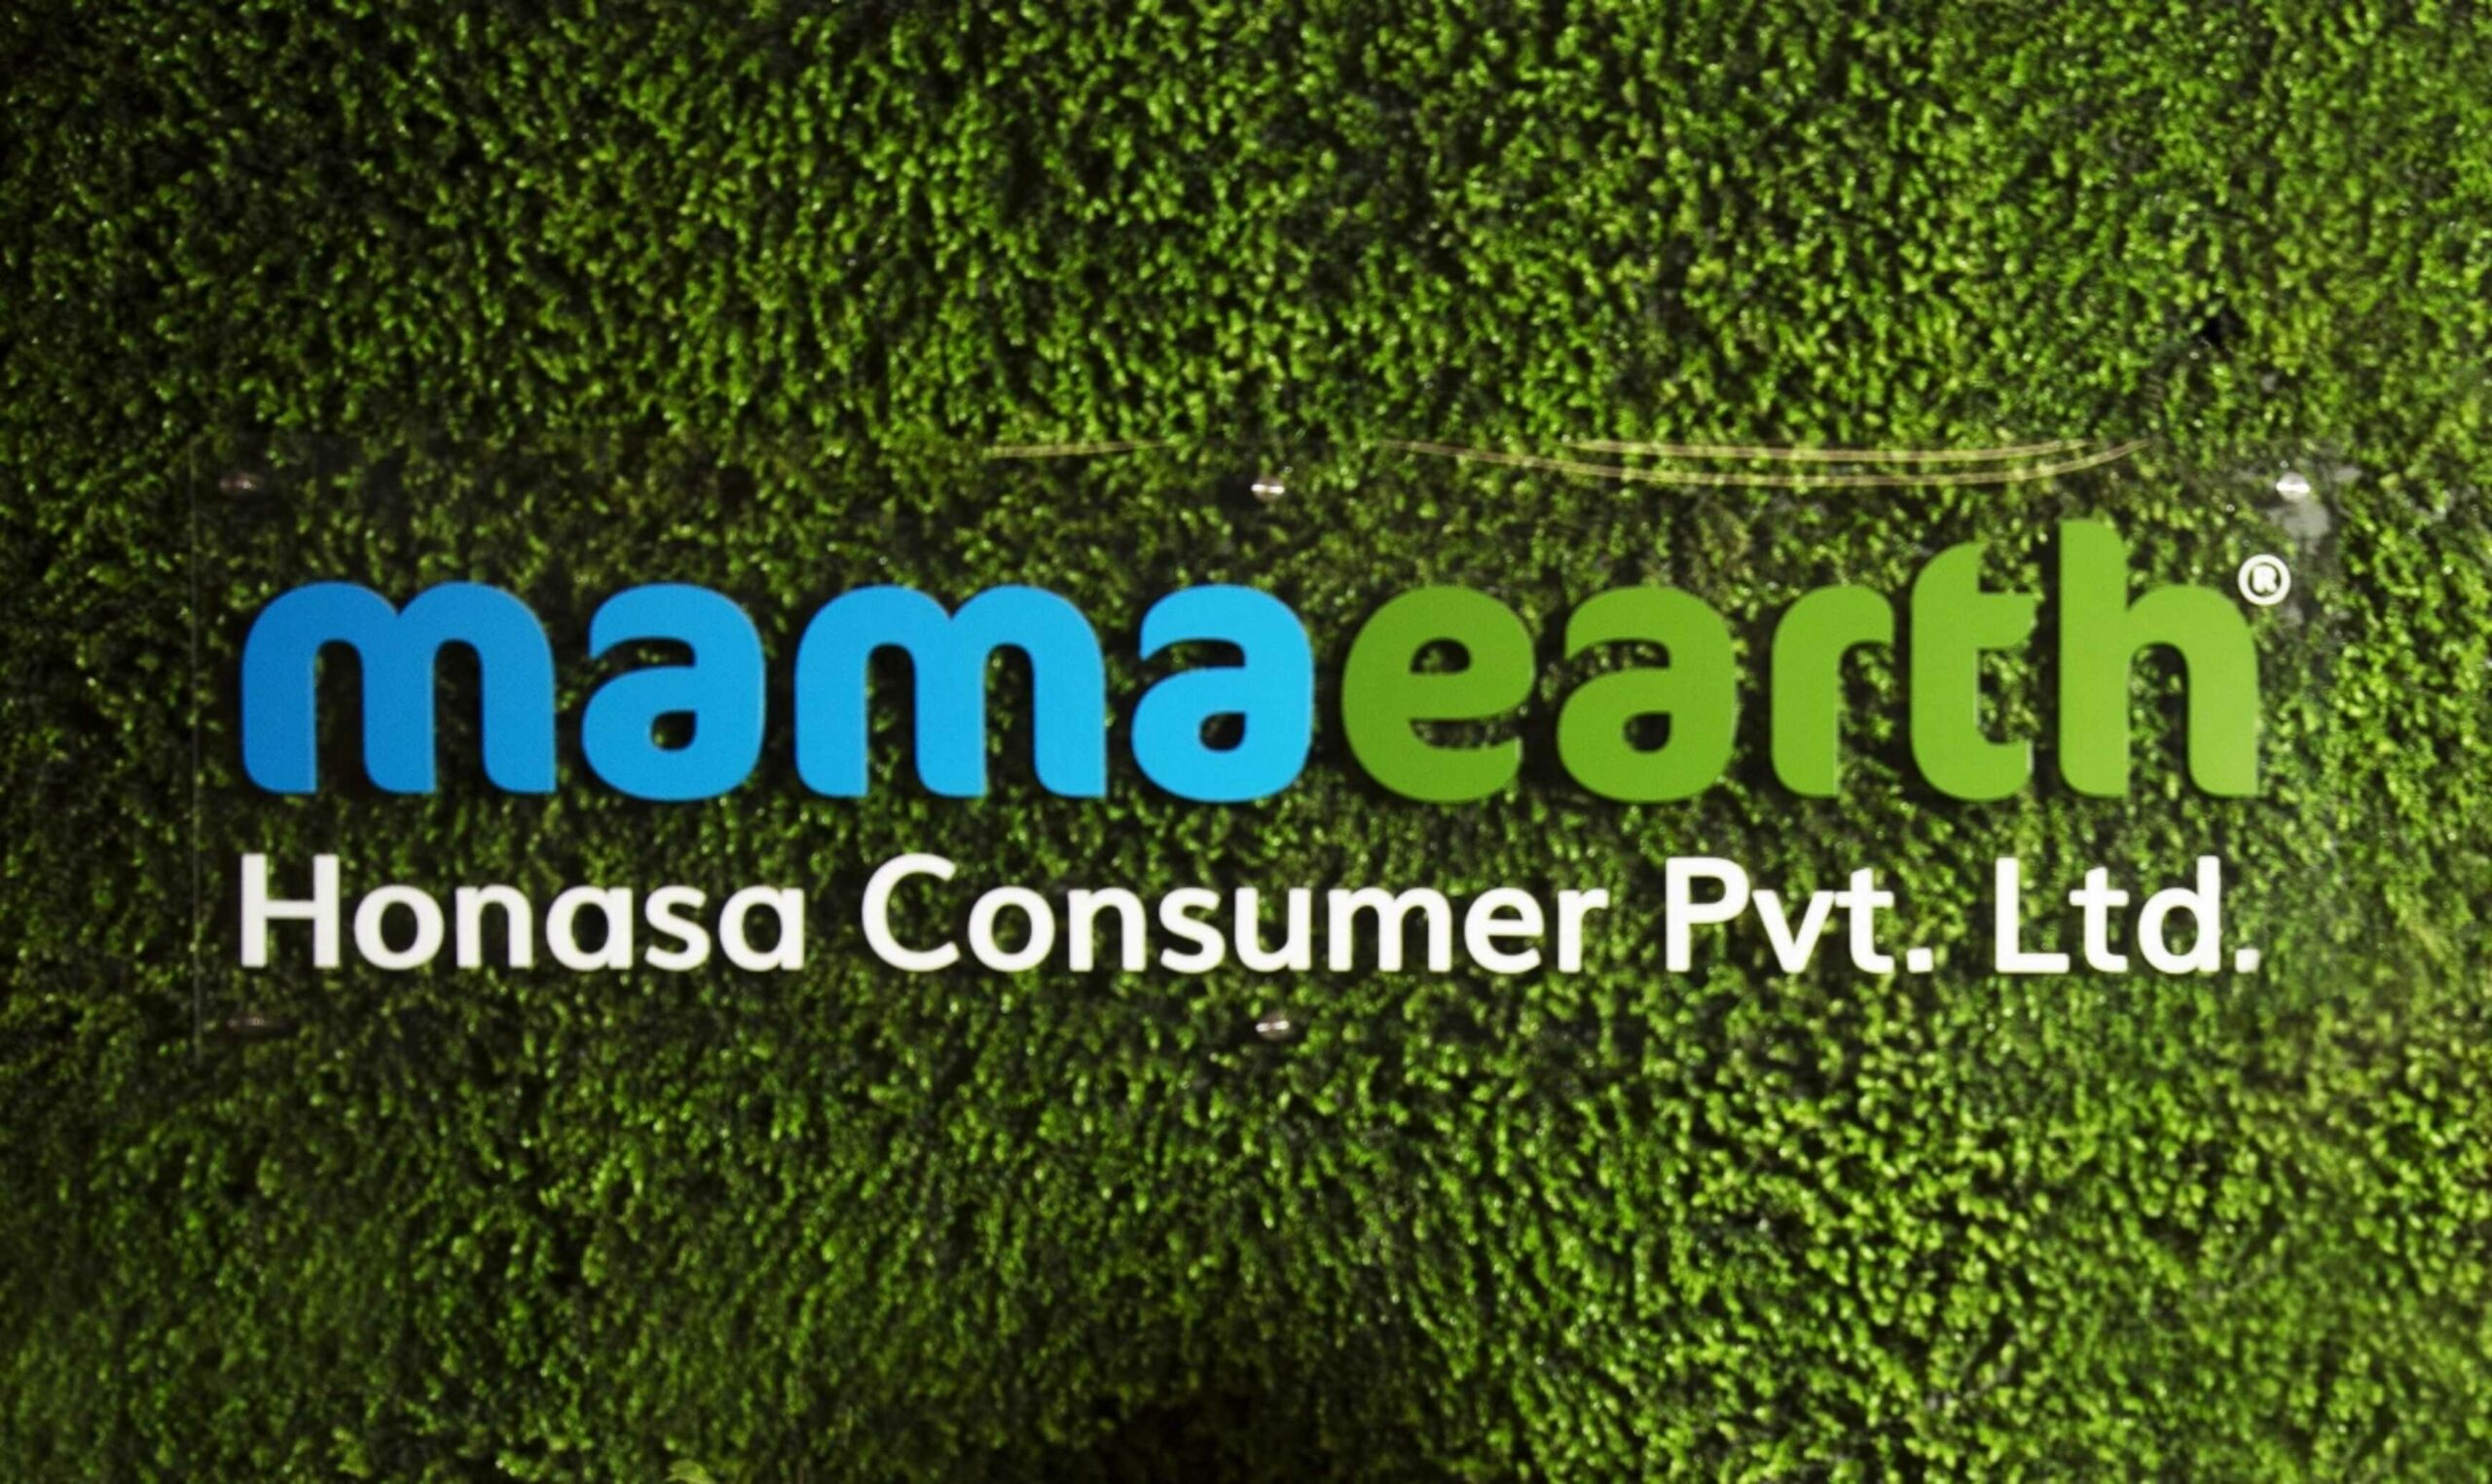 MAMAEARTH CELEBRATES 7 YEARS OF SPREADING GOODNESS